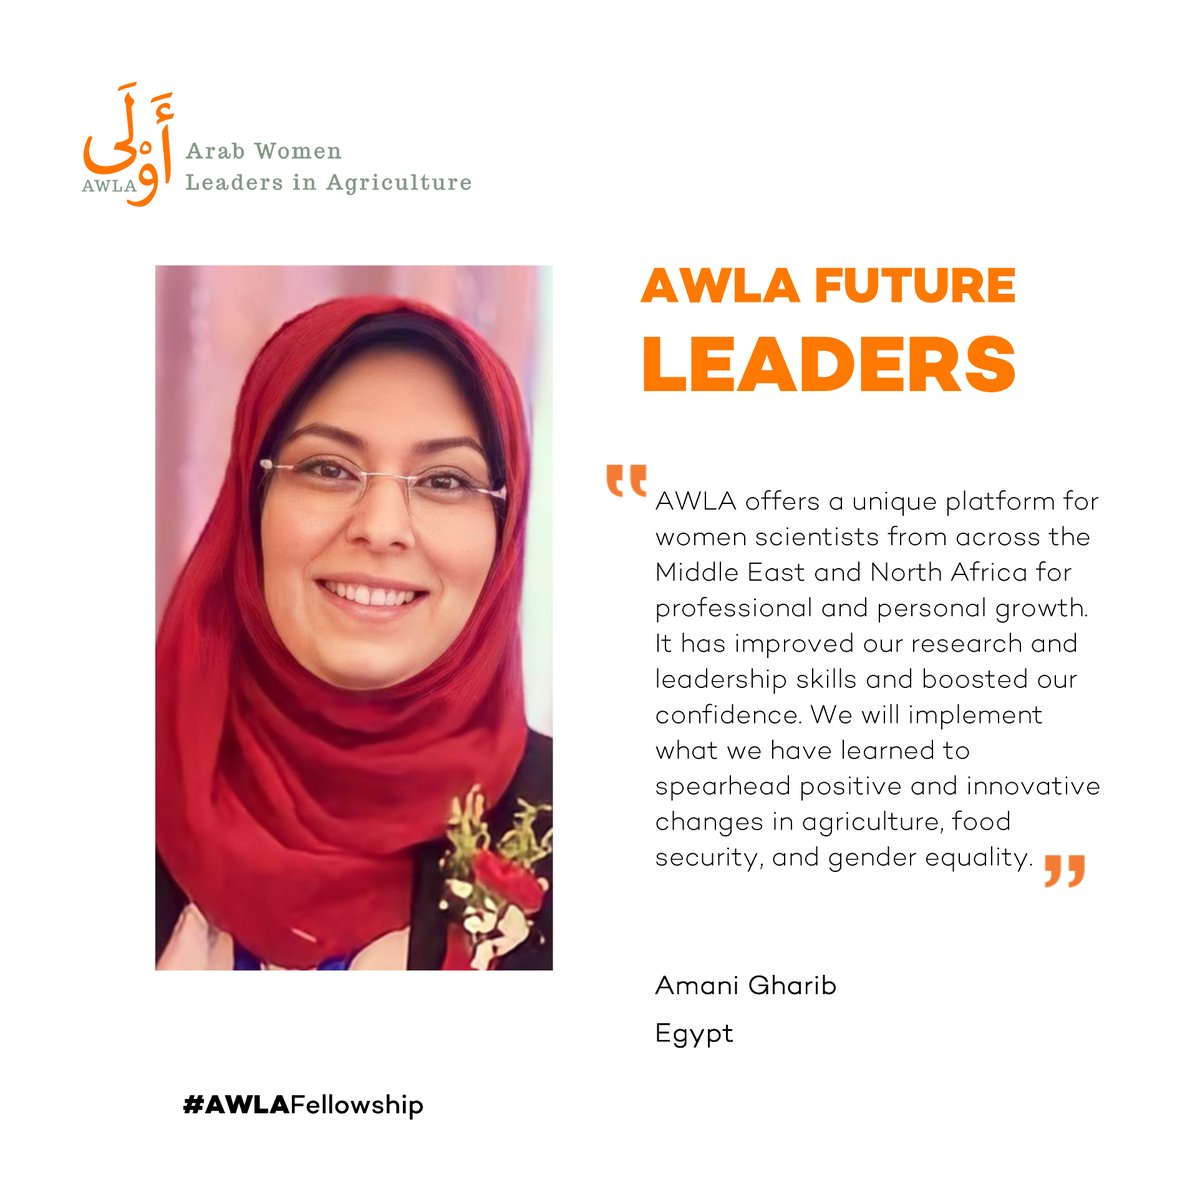 #AWLAFutureLeaders #AWLAFellowship #empowerment #inclusion #genderequality #sustainableagriculture #foodsecurity #womeninscience